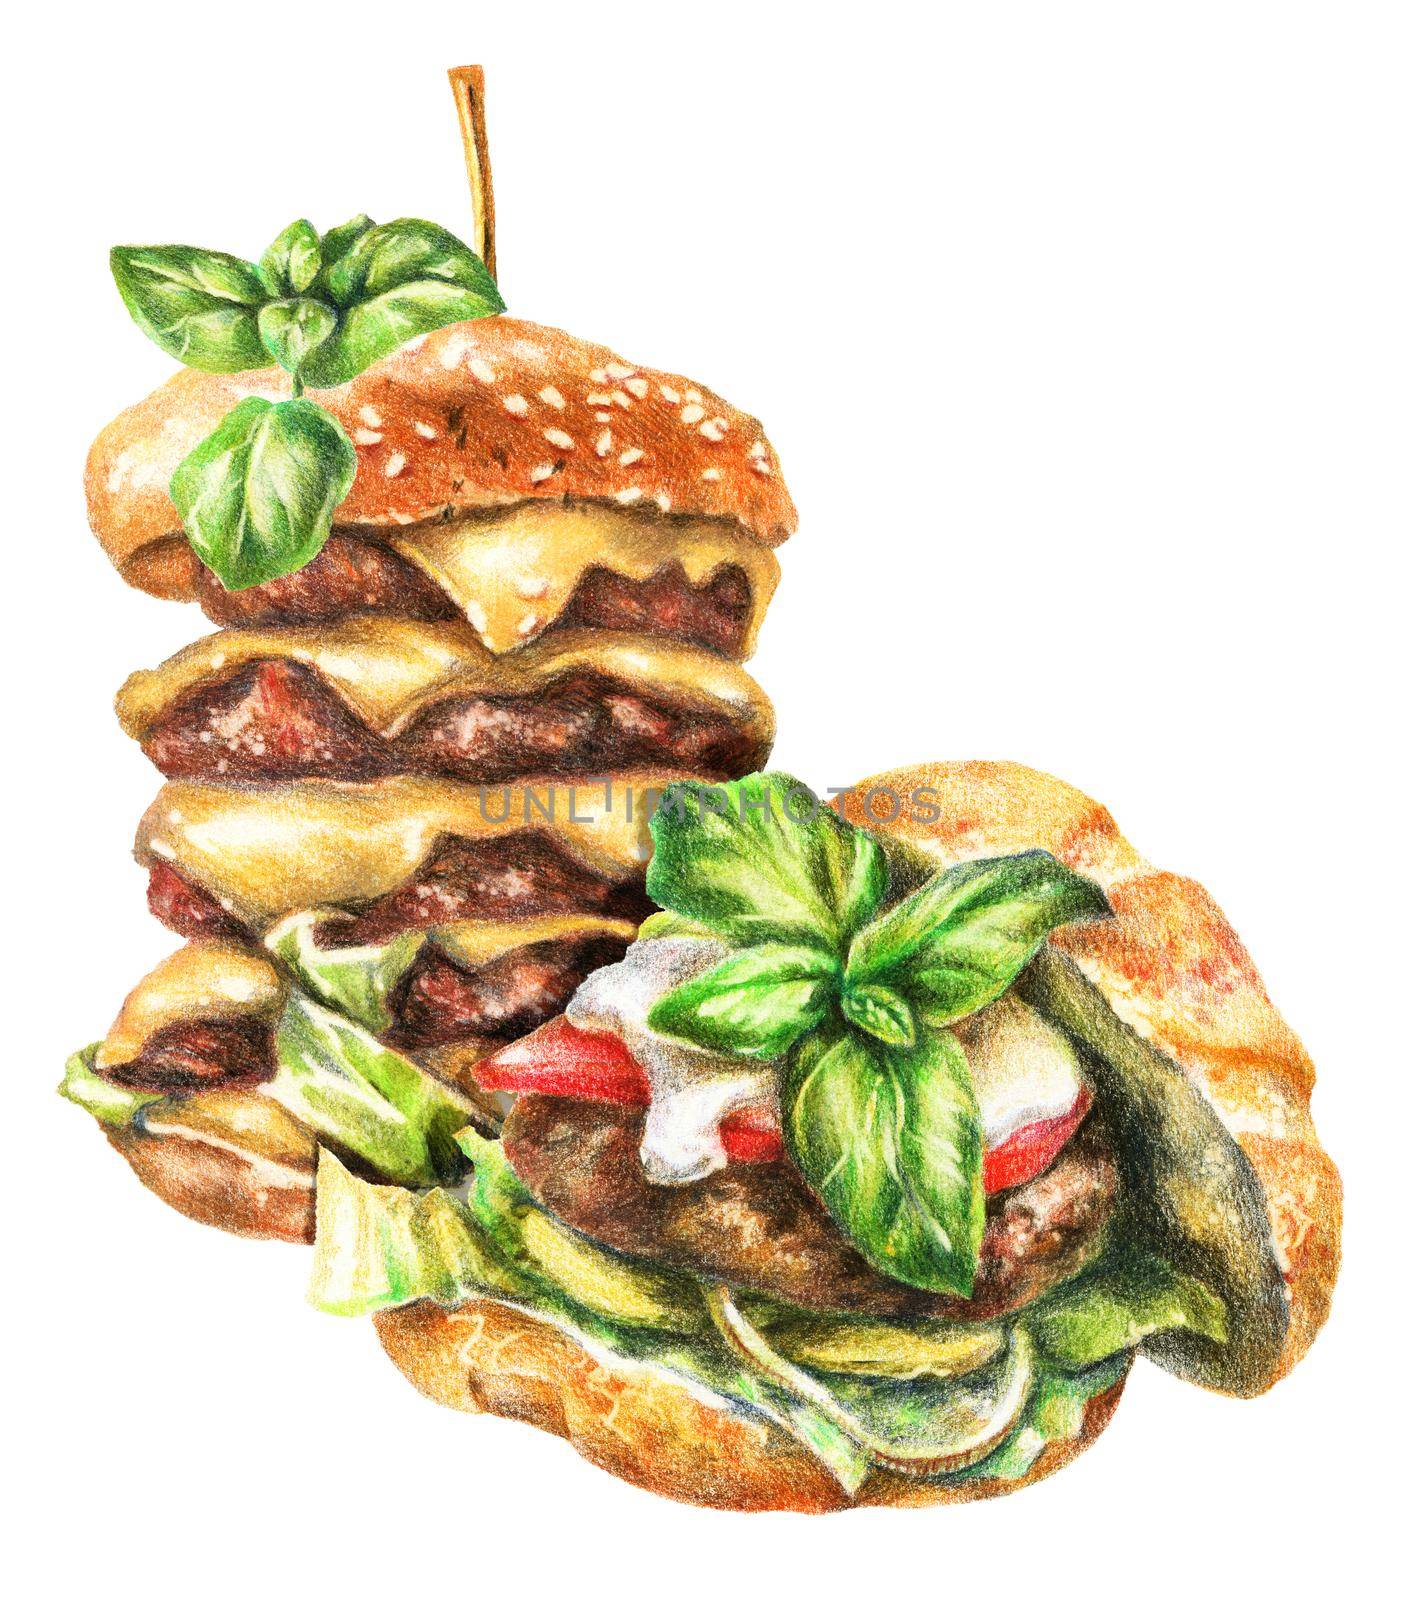 Color pencils realistic food illustration of assorted burgers. Hand-drawn object on white background.